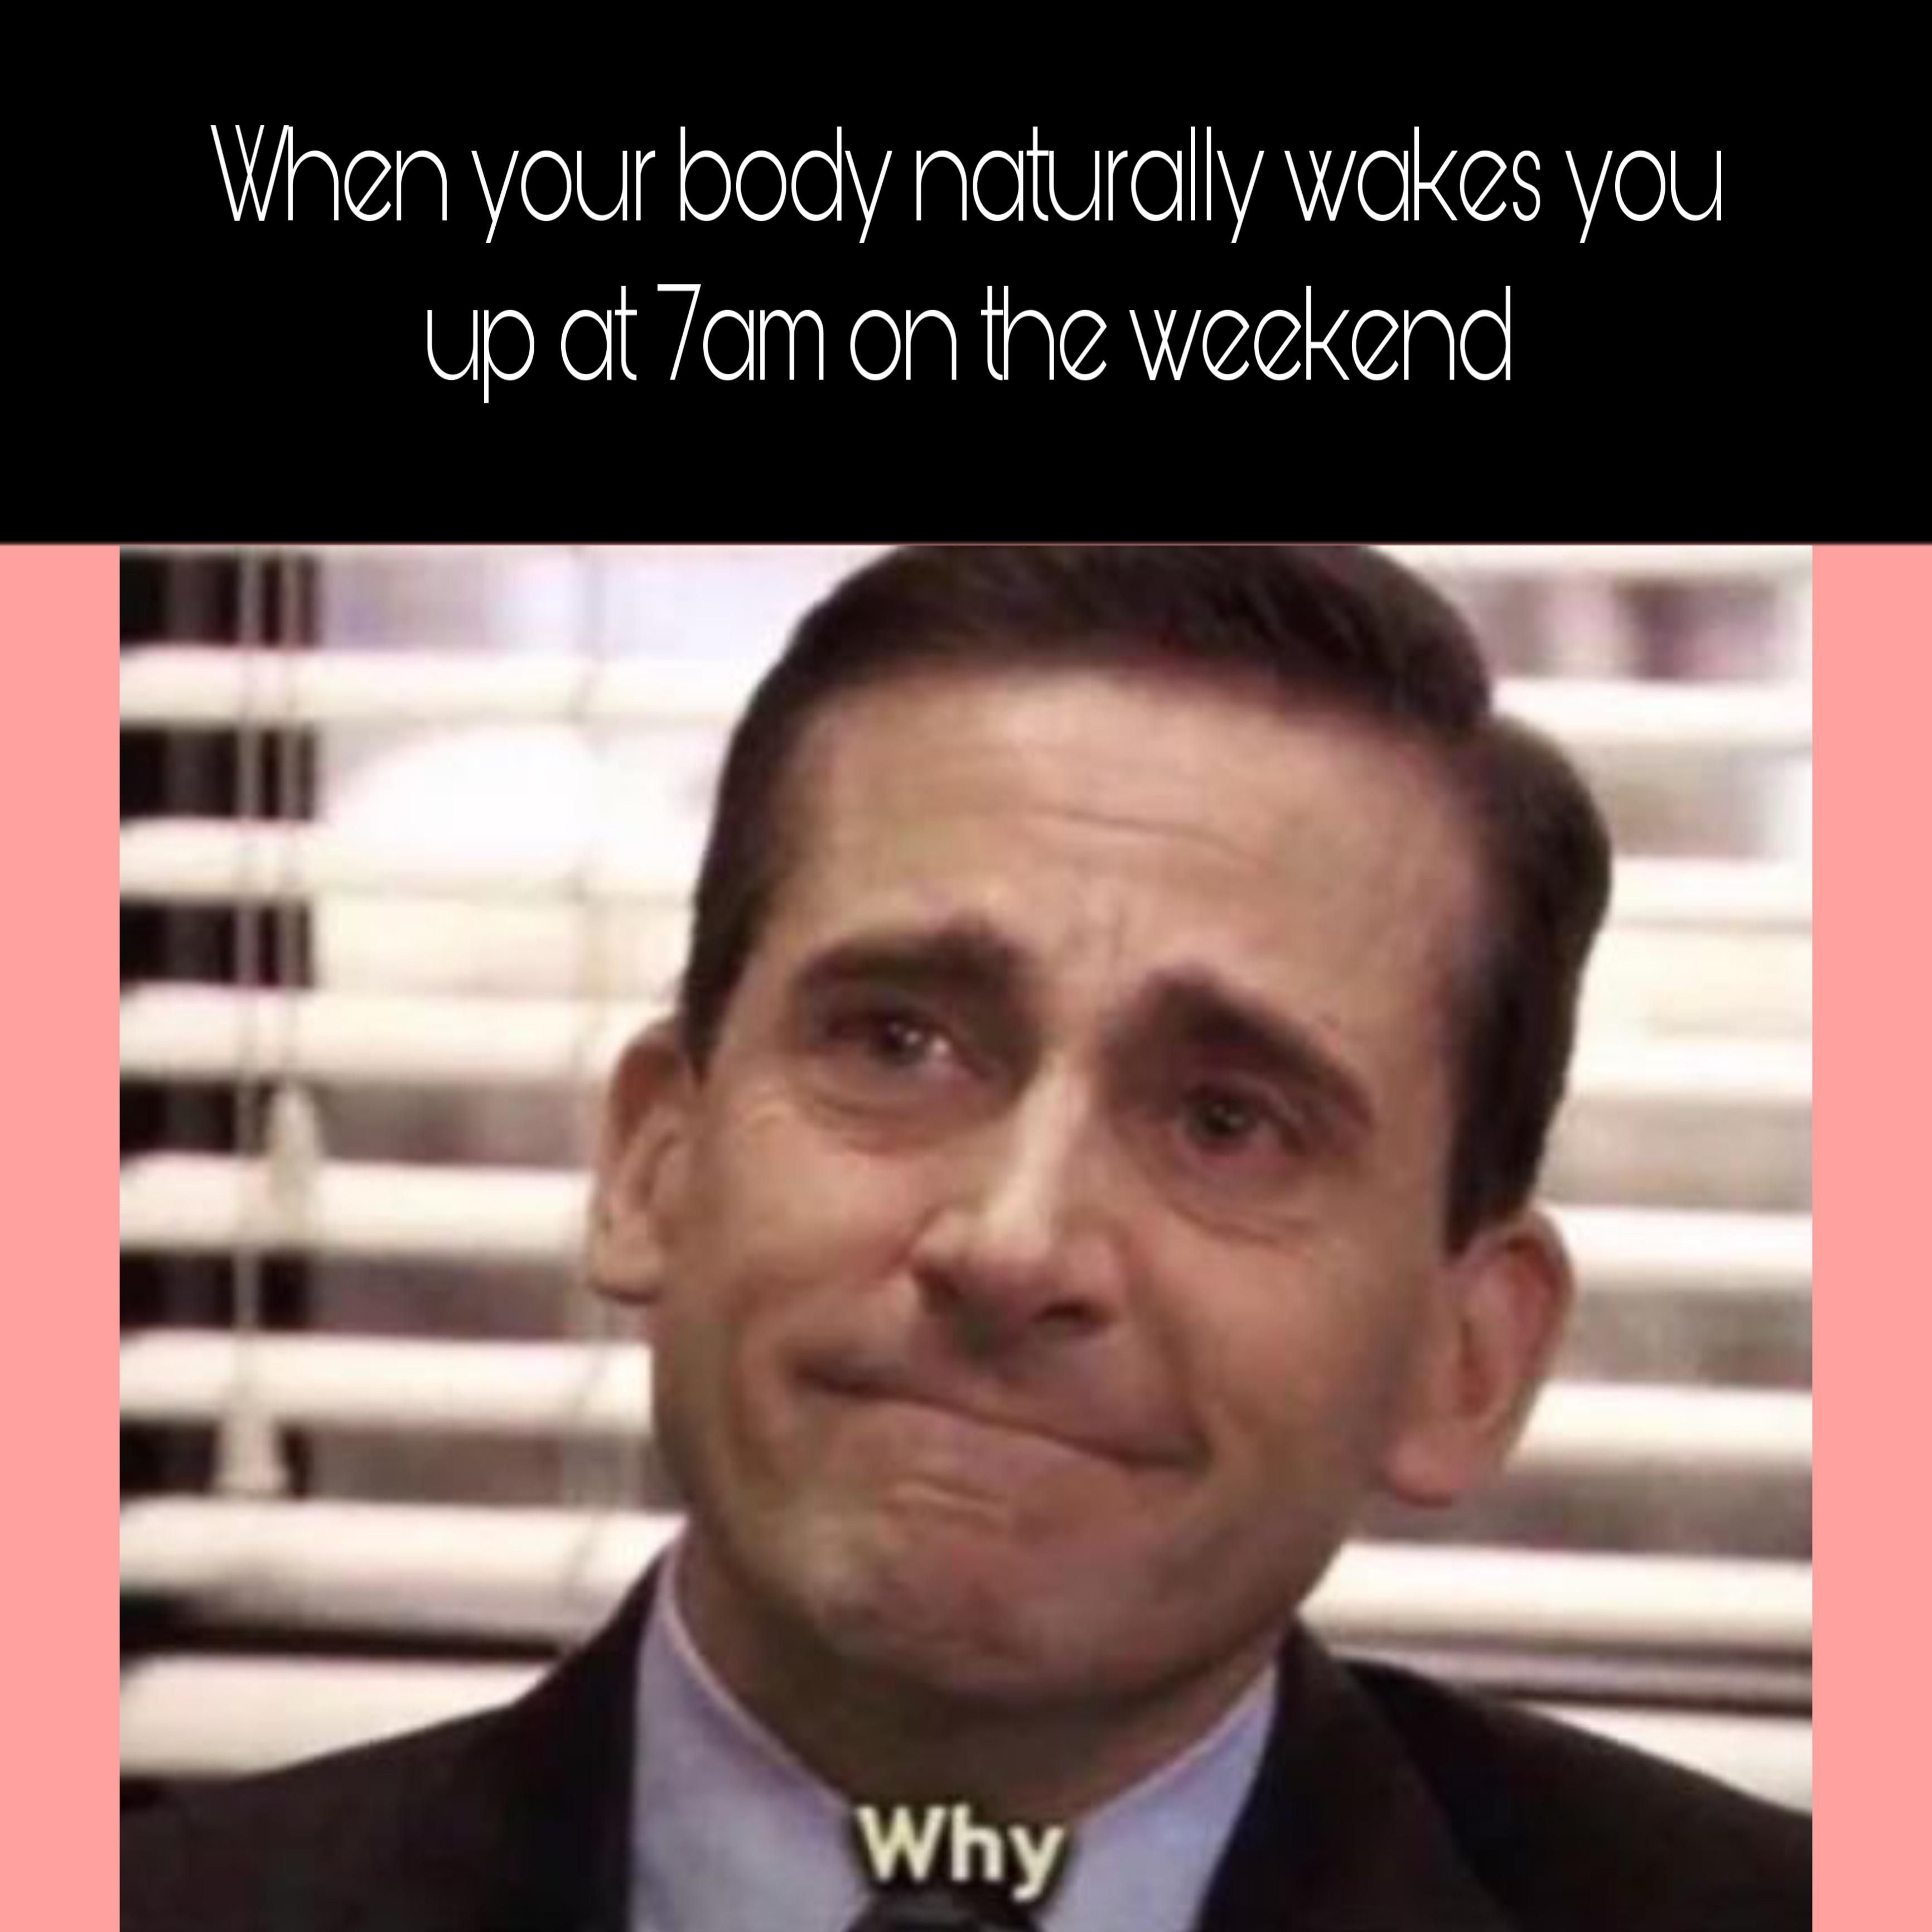 This happened to me the past 3 weekends … I hate it here lol